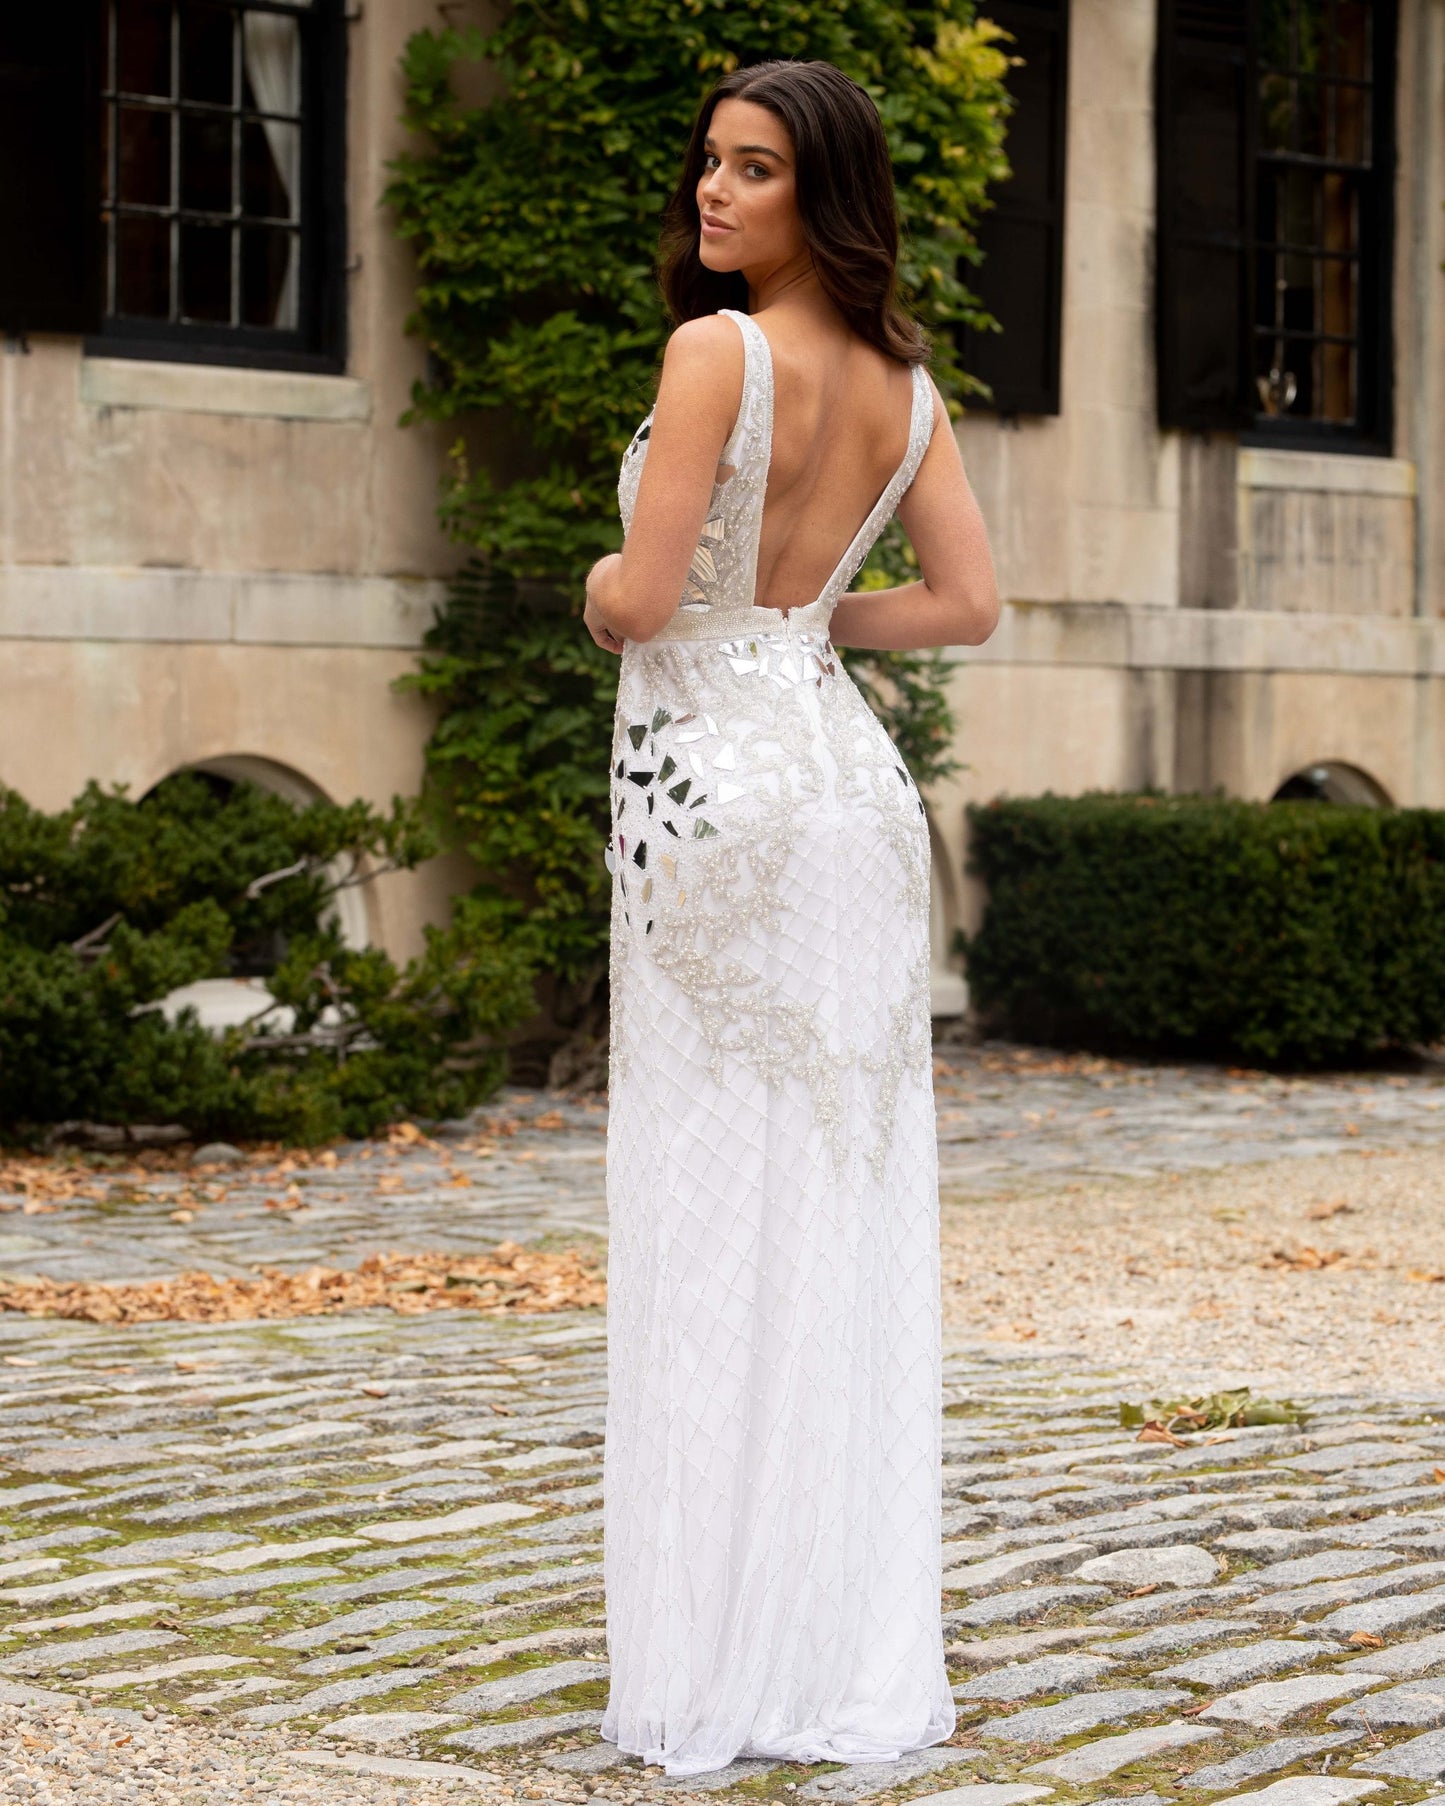 Primavera Couture 3640 is a stunning Long Fitted Formal Evening Gown. Great for Prom, Pageants & More! V Neckline with an open back. Fully beaded & Embellished with Cut Glass Accents along the fitted bust. Floral scroll details with beading & Sequins. Slit in skirt. Great wedding reception dress in Ivory!  Available Sizes: 00,0,2,4,6,8,10,12,14,16,18  Available Colors: Ivory, Gold, Lilac, Platinum, Raspberry